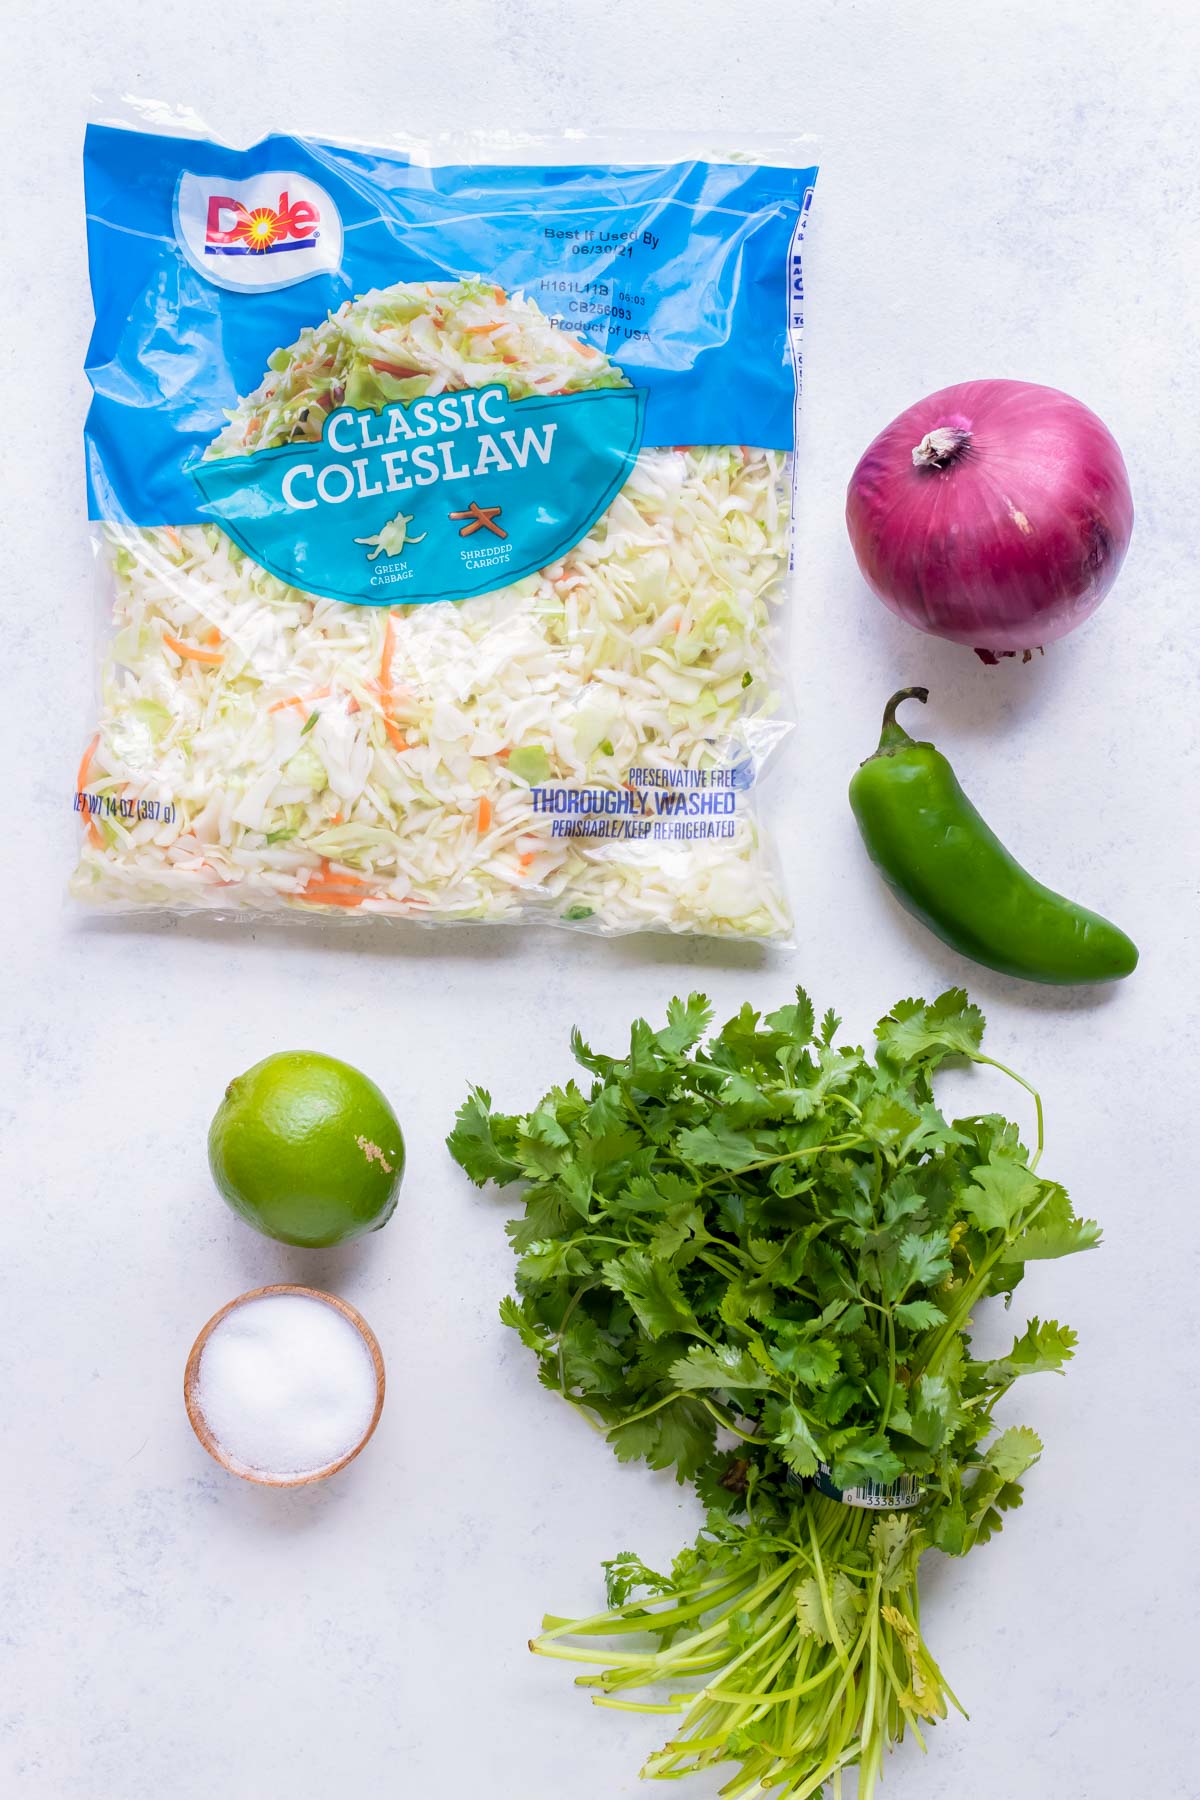 Cabbage mix, red onion, jalapeño pepper, lime, salt, and cilantro are the ingredients for this taco slaw.